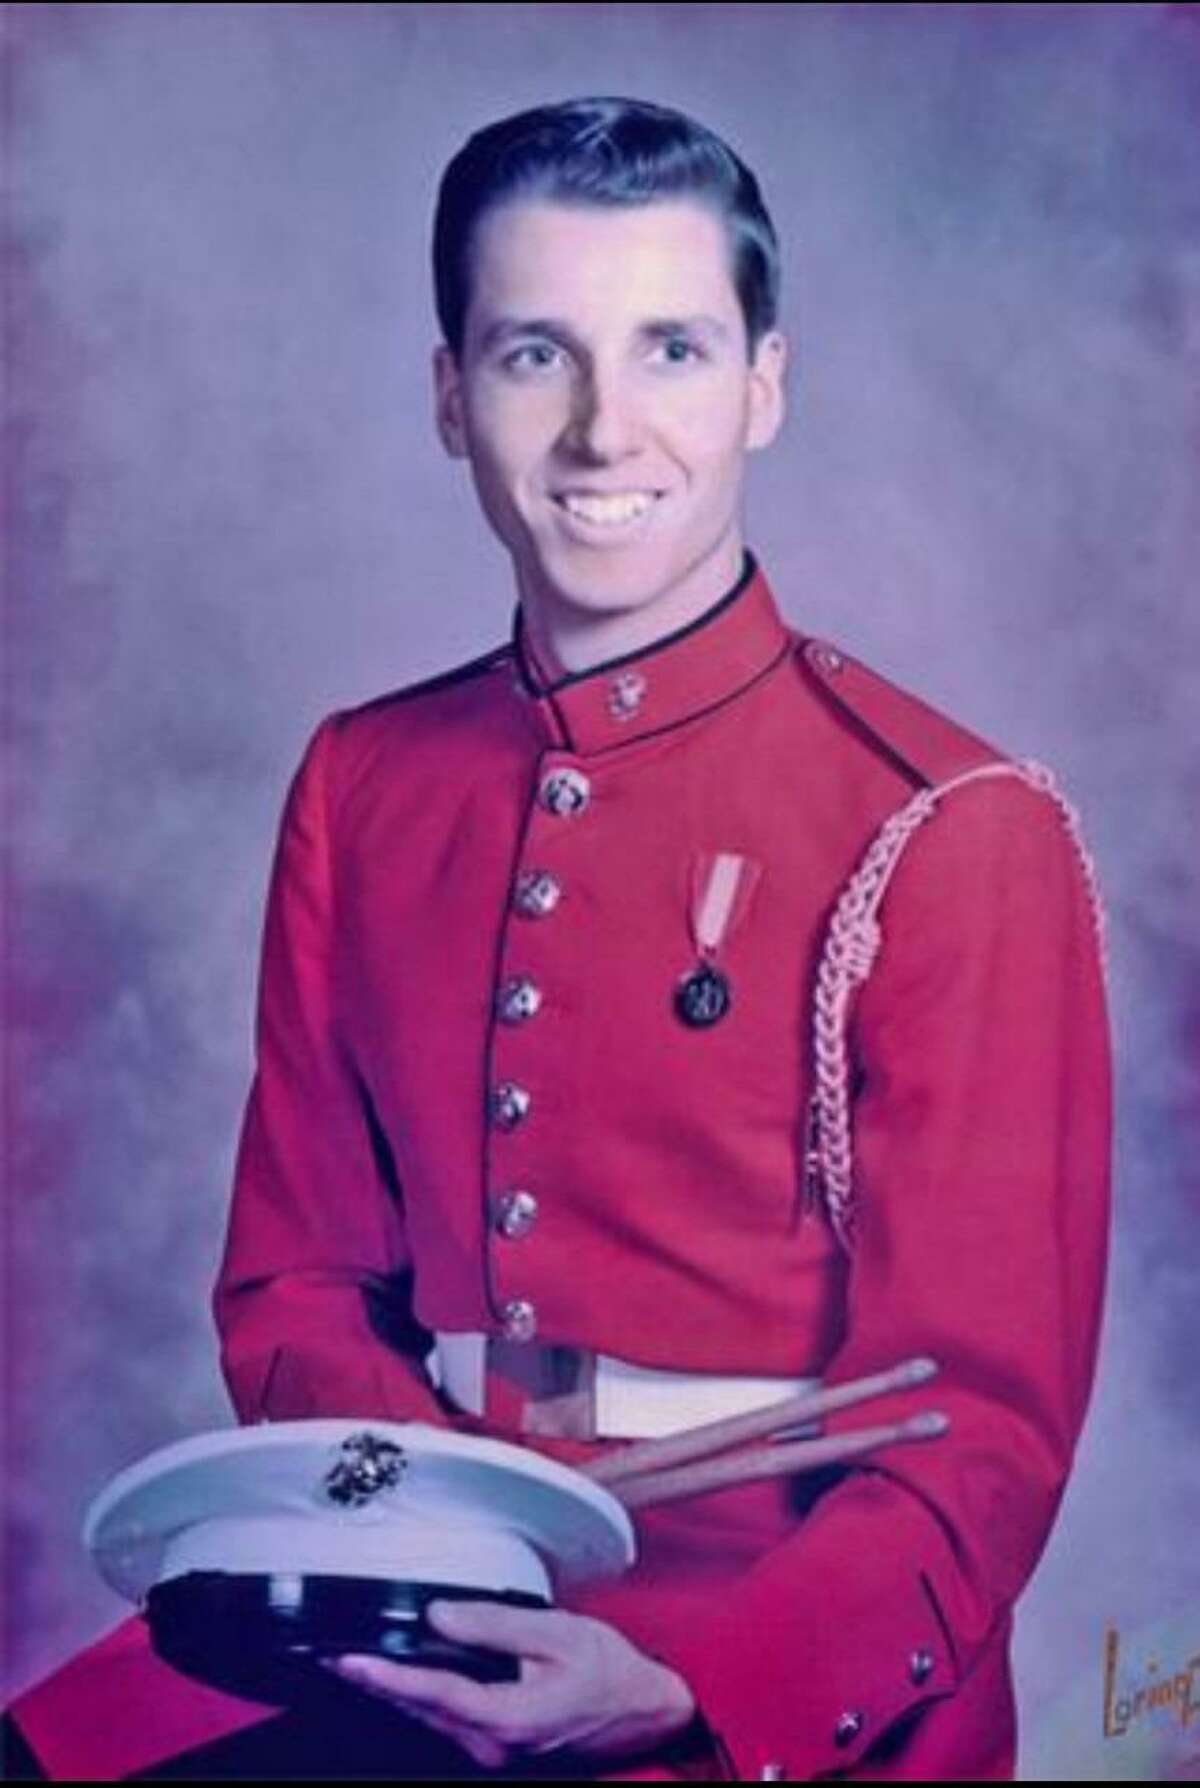 Eddie Ostrowski in his dress uniform as a member of the USMC Drum & Bugle Corps, “The Commandant’s Own.”